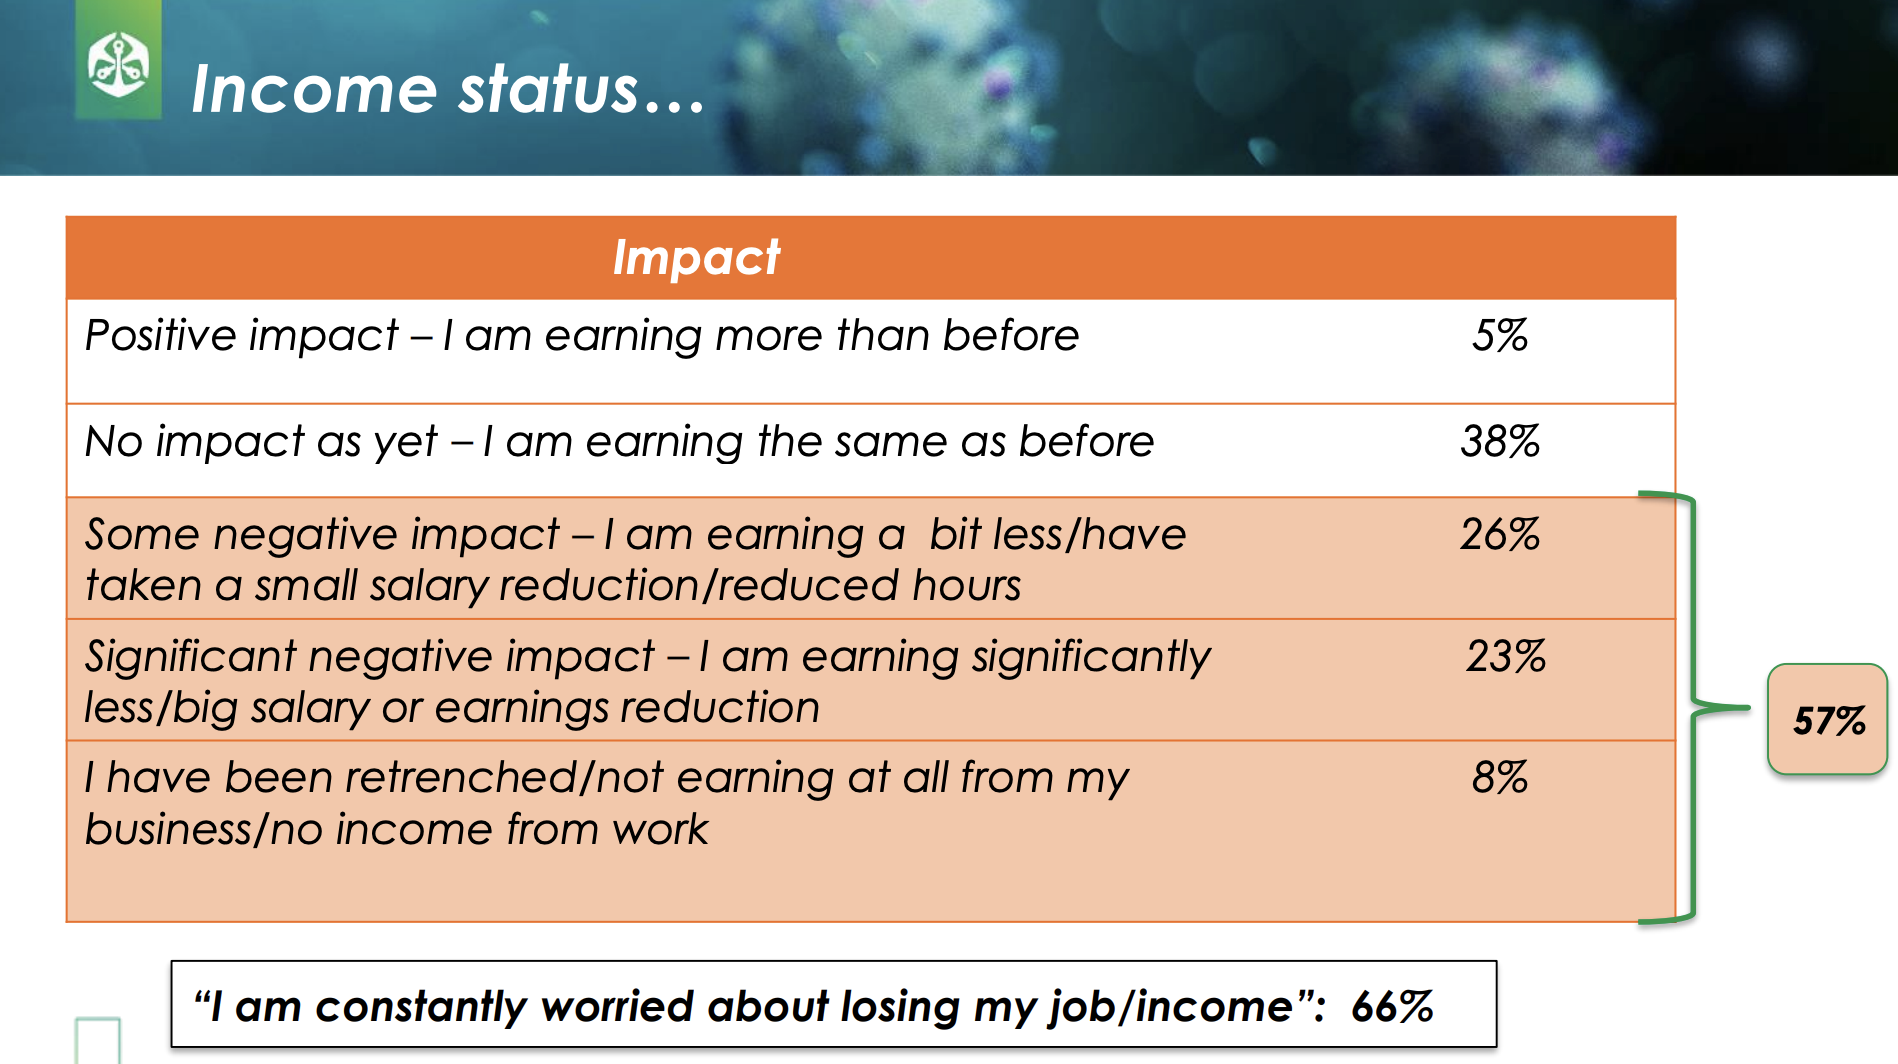 66% of South Africans say "I am constantly worried about losing my job/income"